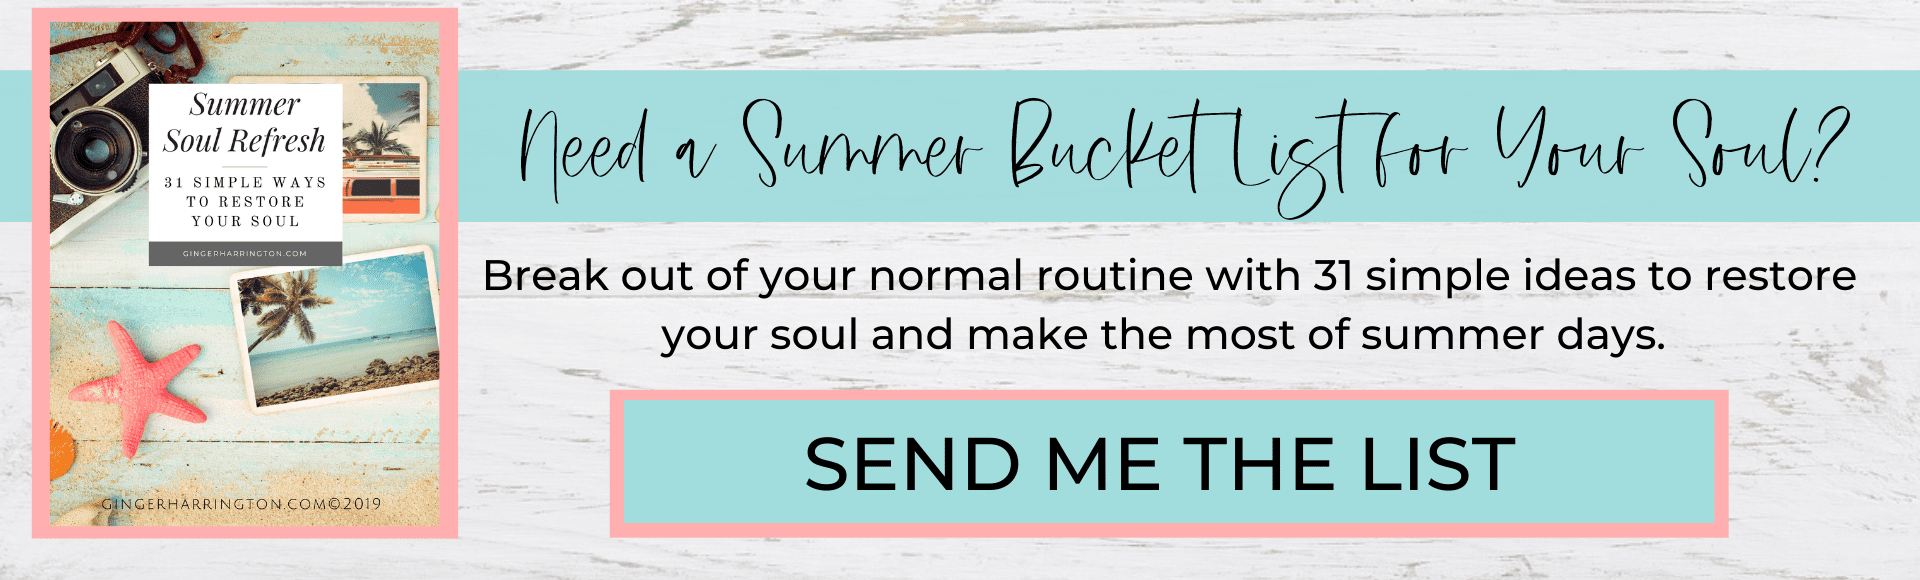 Make the most of summer to renew and energize your soul. Get practical tips to create time to feed your mind, body, and spirit for Christian women. Include your kids on many of the tips.